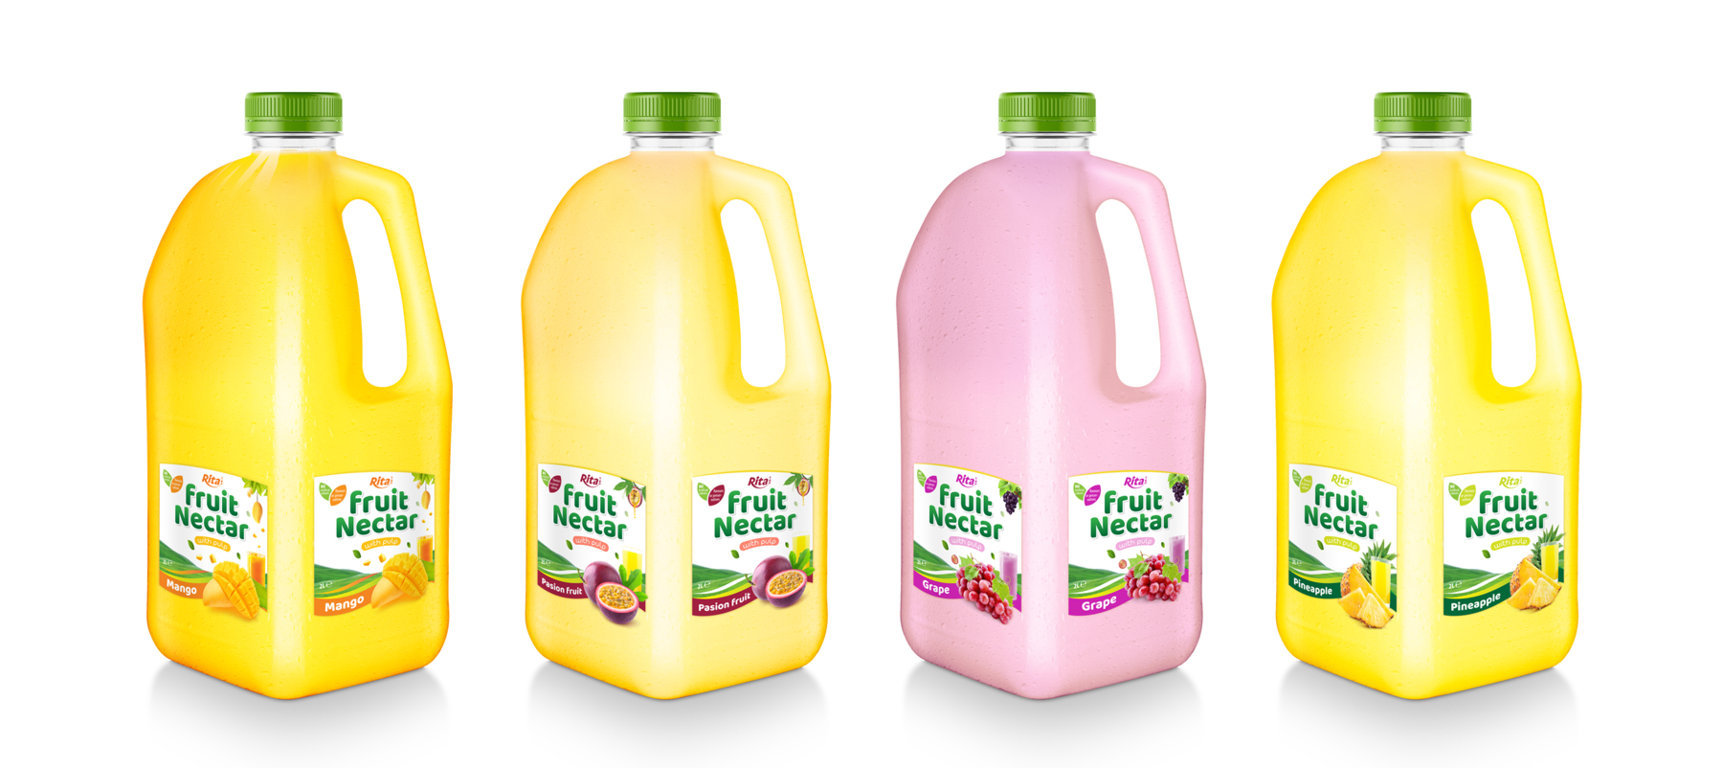 Fruit Nectar 2L with passion fruit flavor